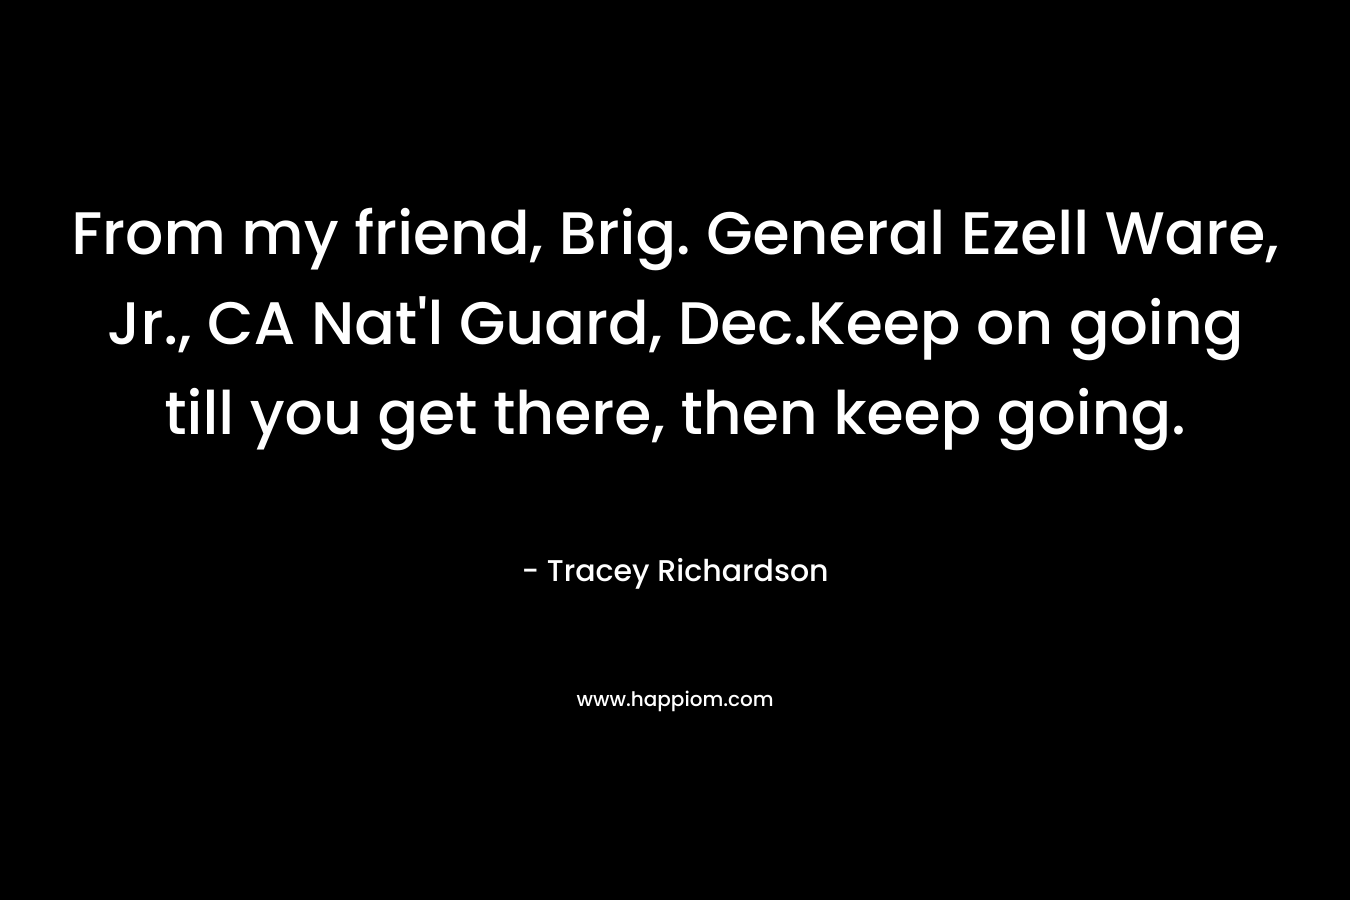 From my friend, Brig. General Ezell Ware, Jr., CA Nat'l Guard, Dec.Keep on going till you get there, then keep going.